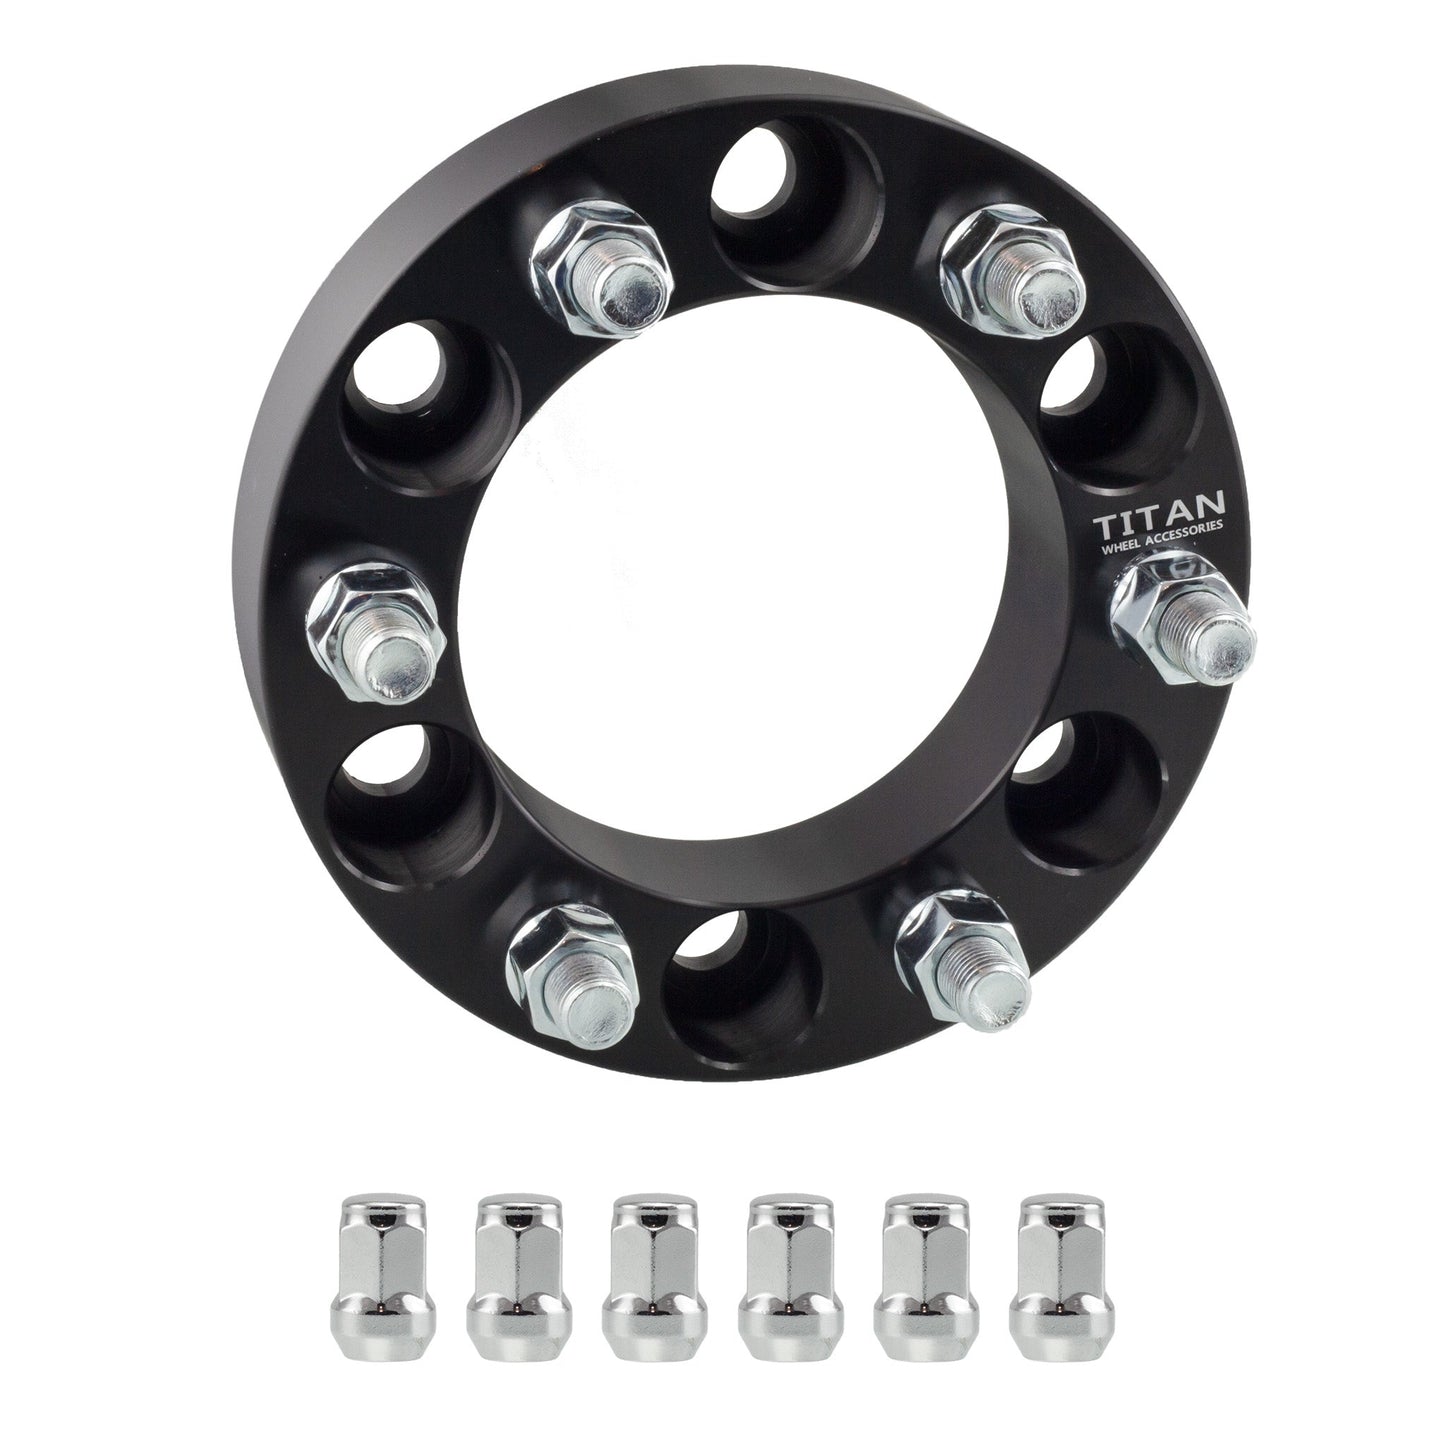 1.5" (38mm) Titan Wheel Spacers for Ford Bronco 2021-2022 Ranger 2019+| 6x5.5 (6x139.7) | 93.1 Hubcentric | 12x1.5 Studs | Titan Wheel Accessories